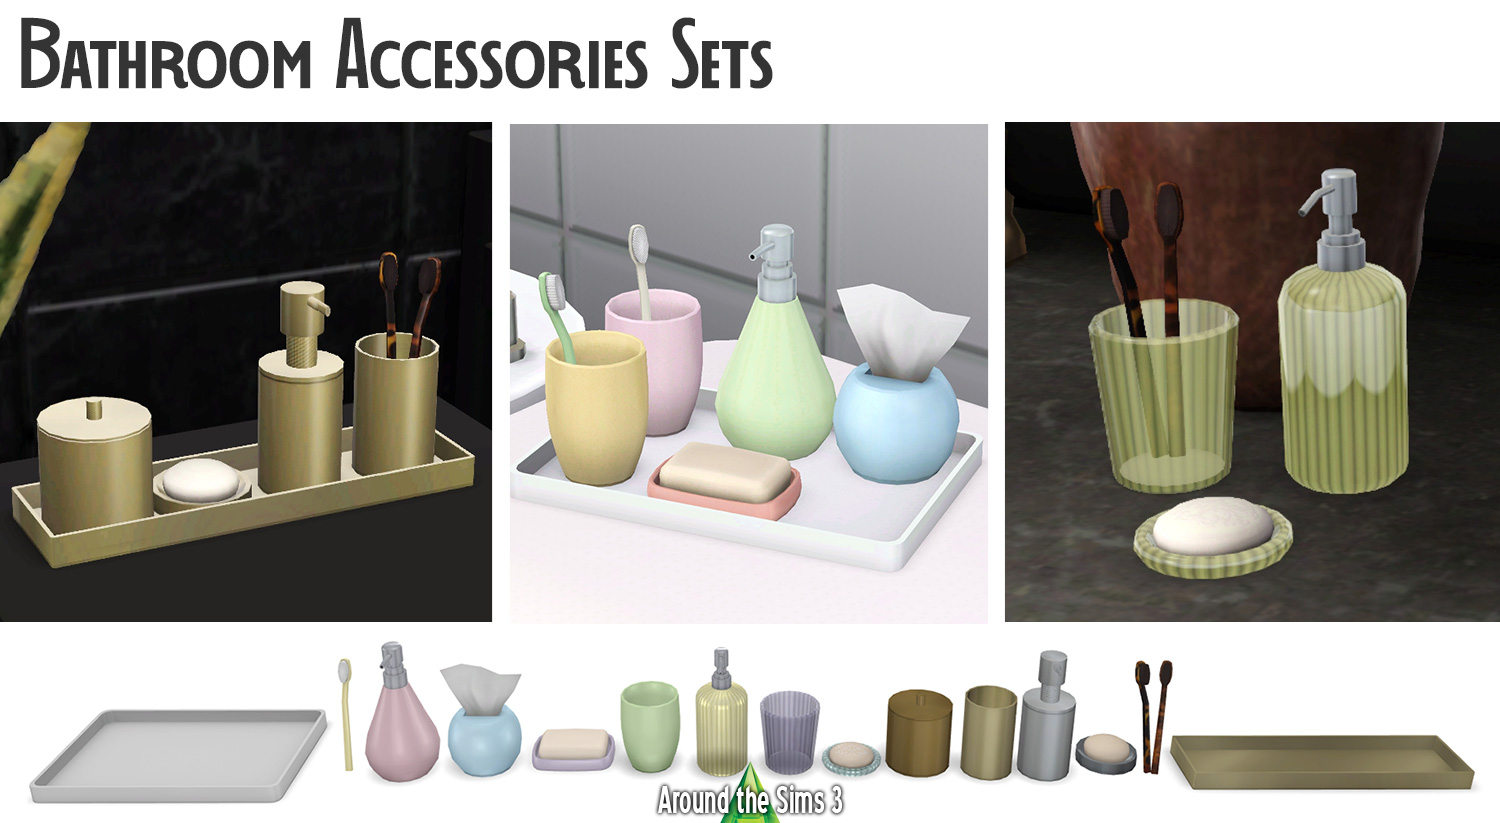 The Sims 3 Custom Content Downloads - The Sims 3 Catalog